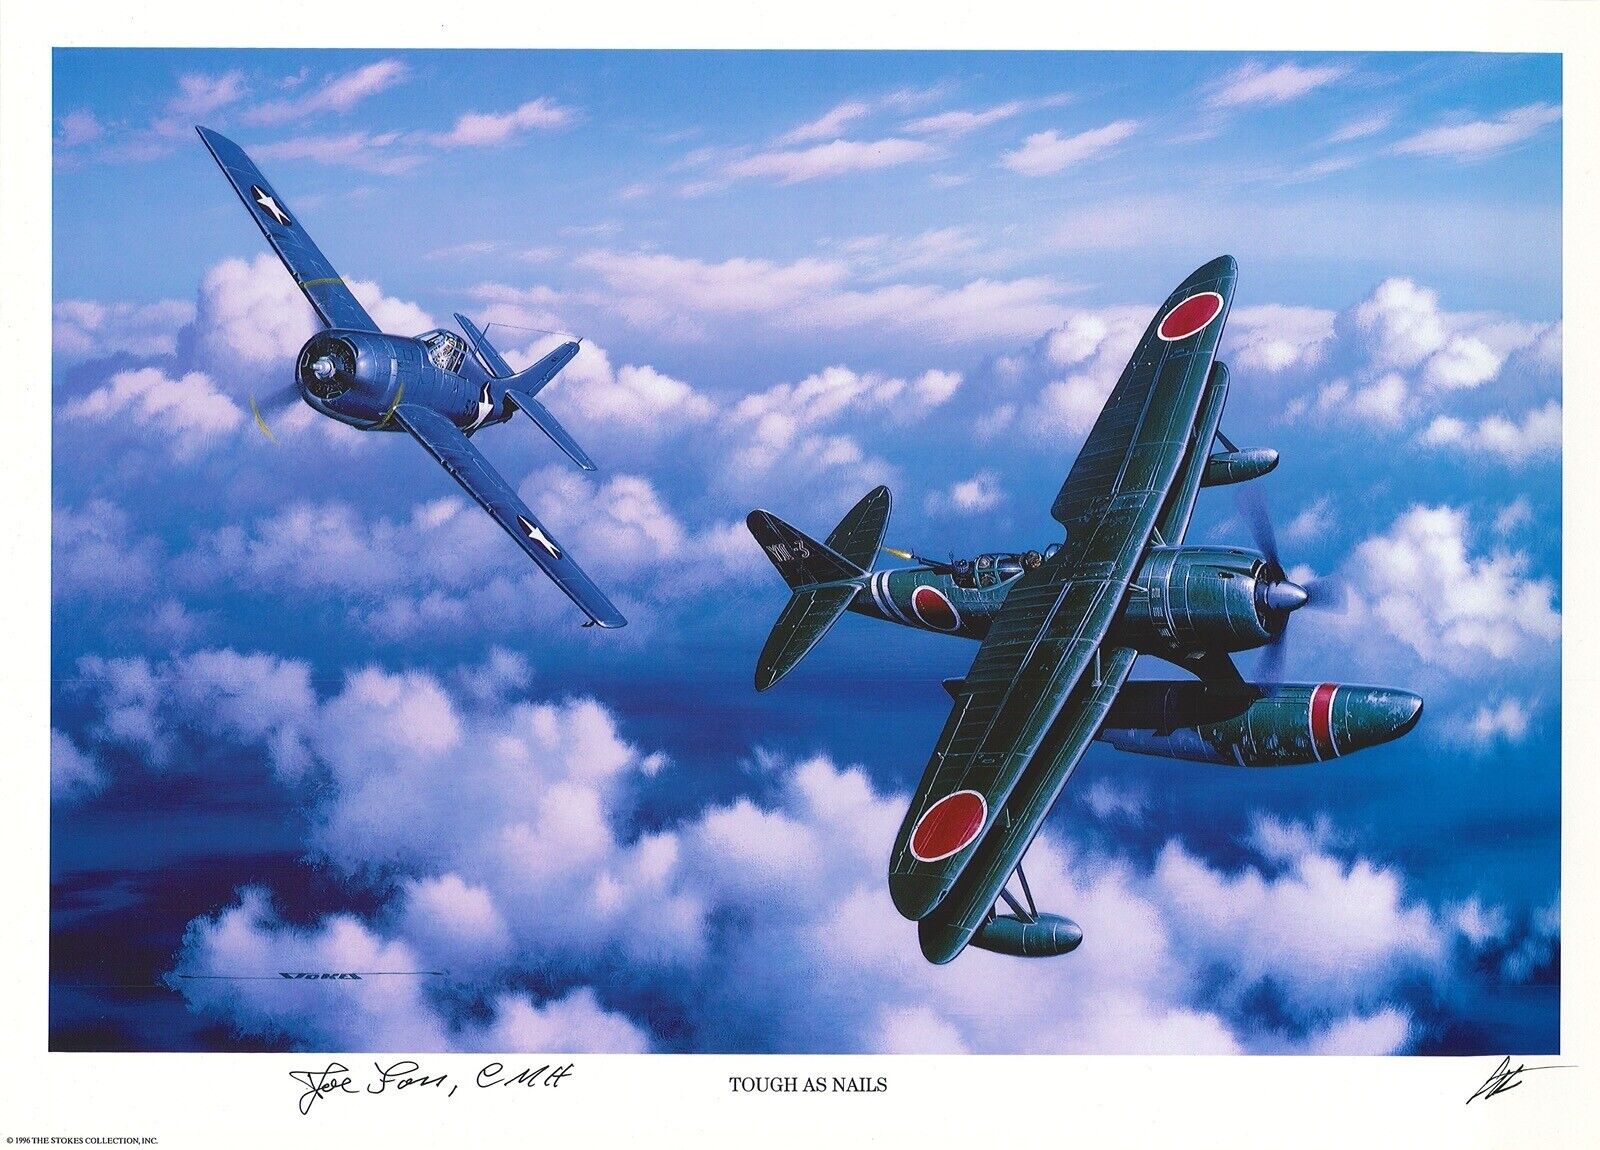 JOE FOSS HAND SIGNED TOUGH AS NAILS PRINT STAN STOKES WWII ACE MOH